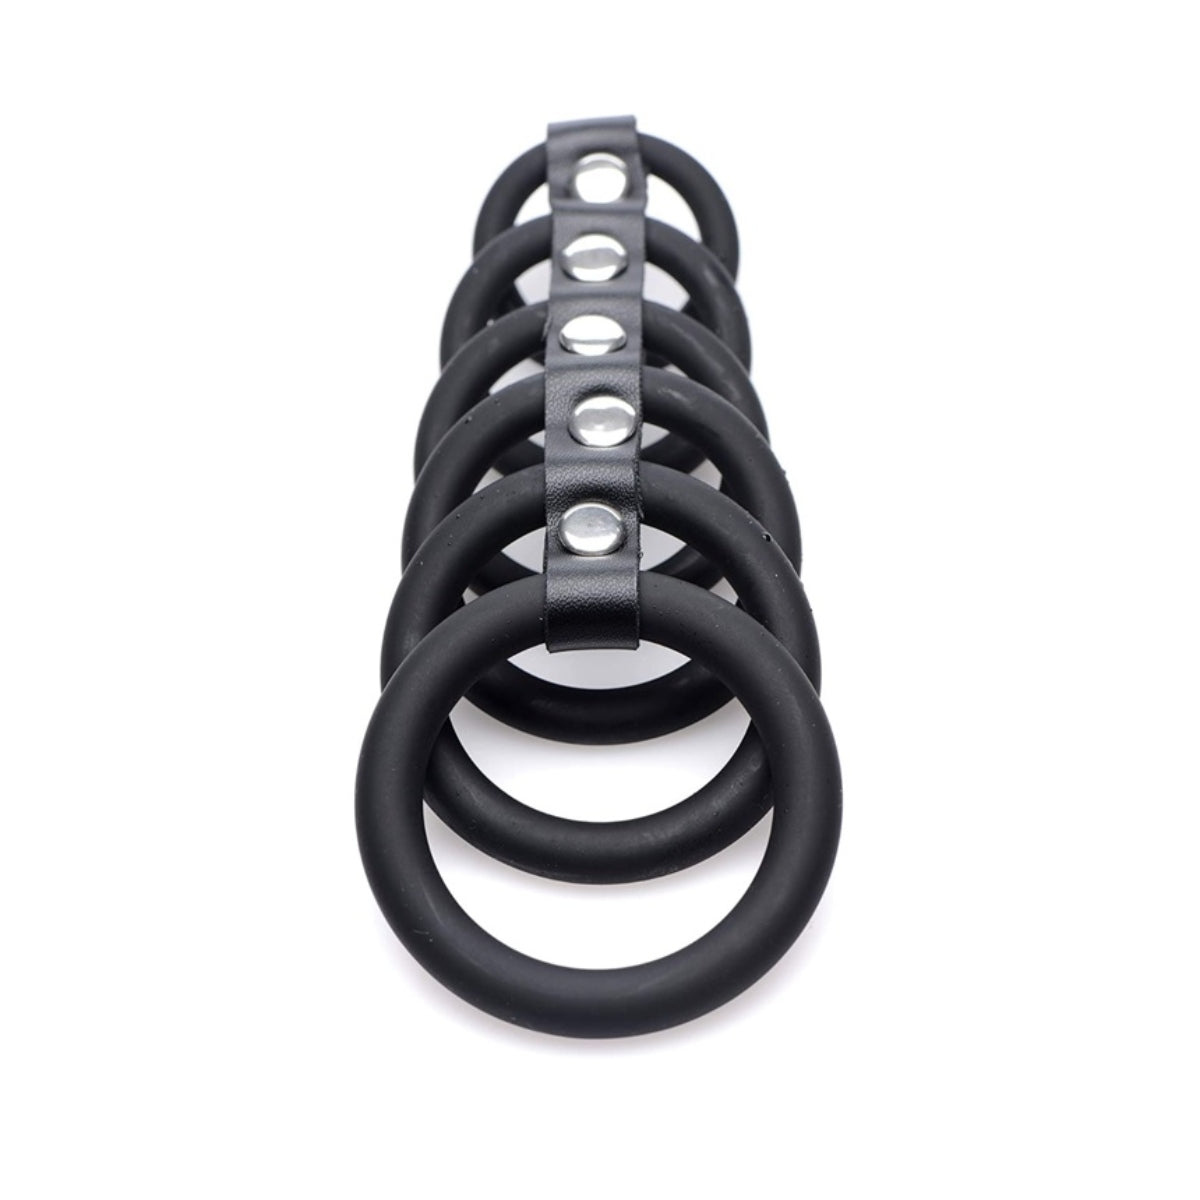 Strict 6 Ring Silicone Chastity Device Black